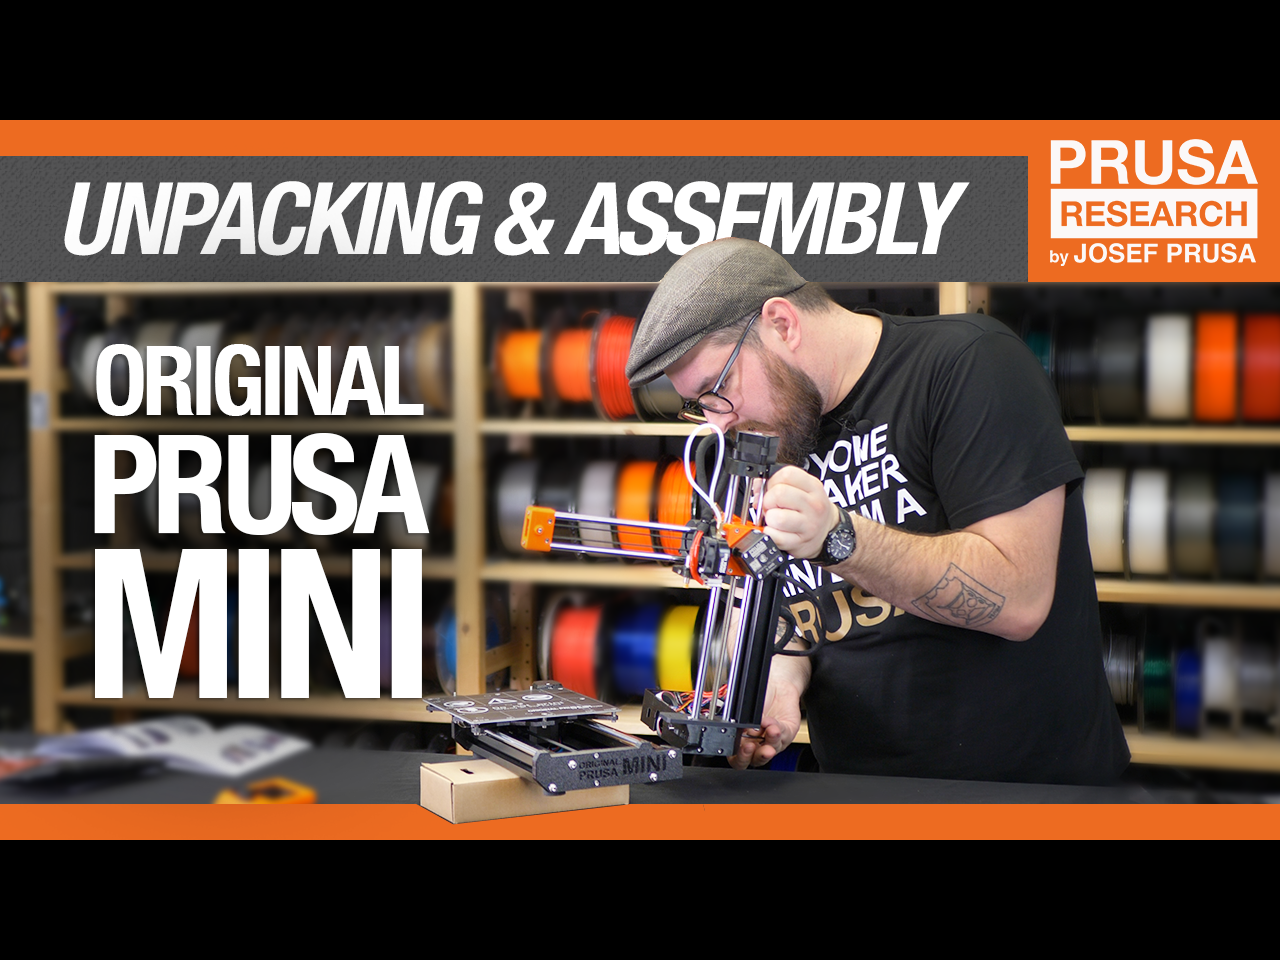 Unboxing and assembly by Josef Prusa